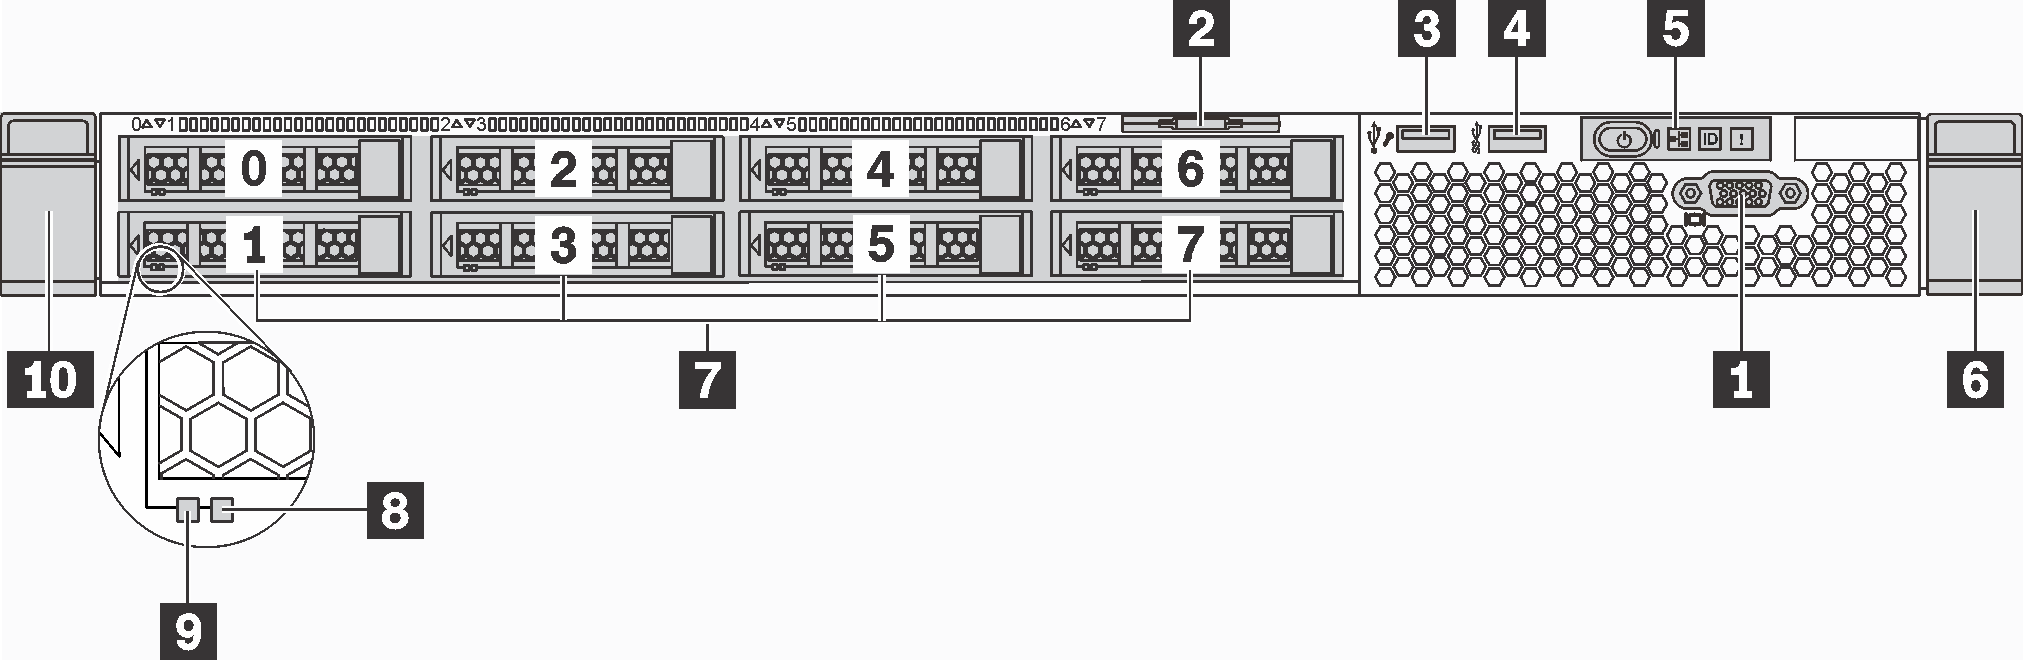 Graphic that depicts the front view of the server models with 2.5-inch drive bays. It includes callouts to identify each of the components.